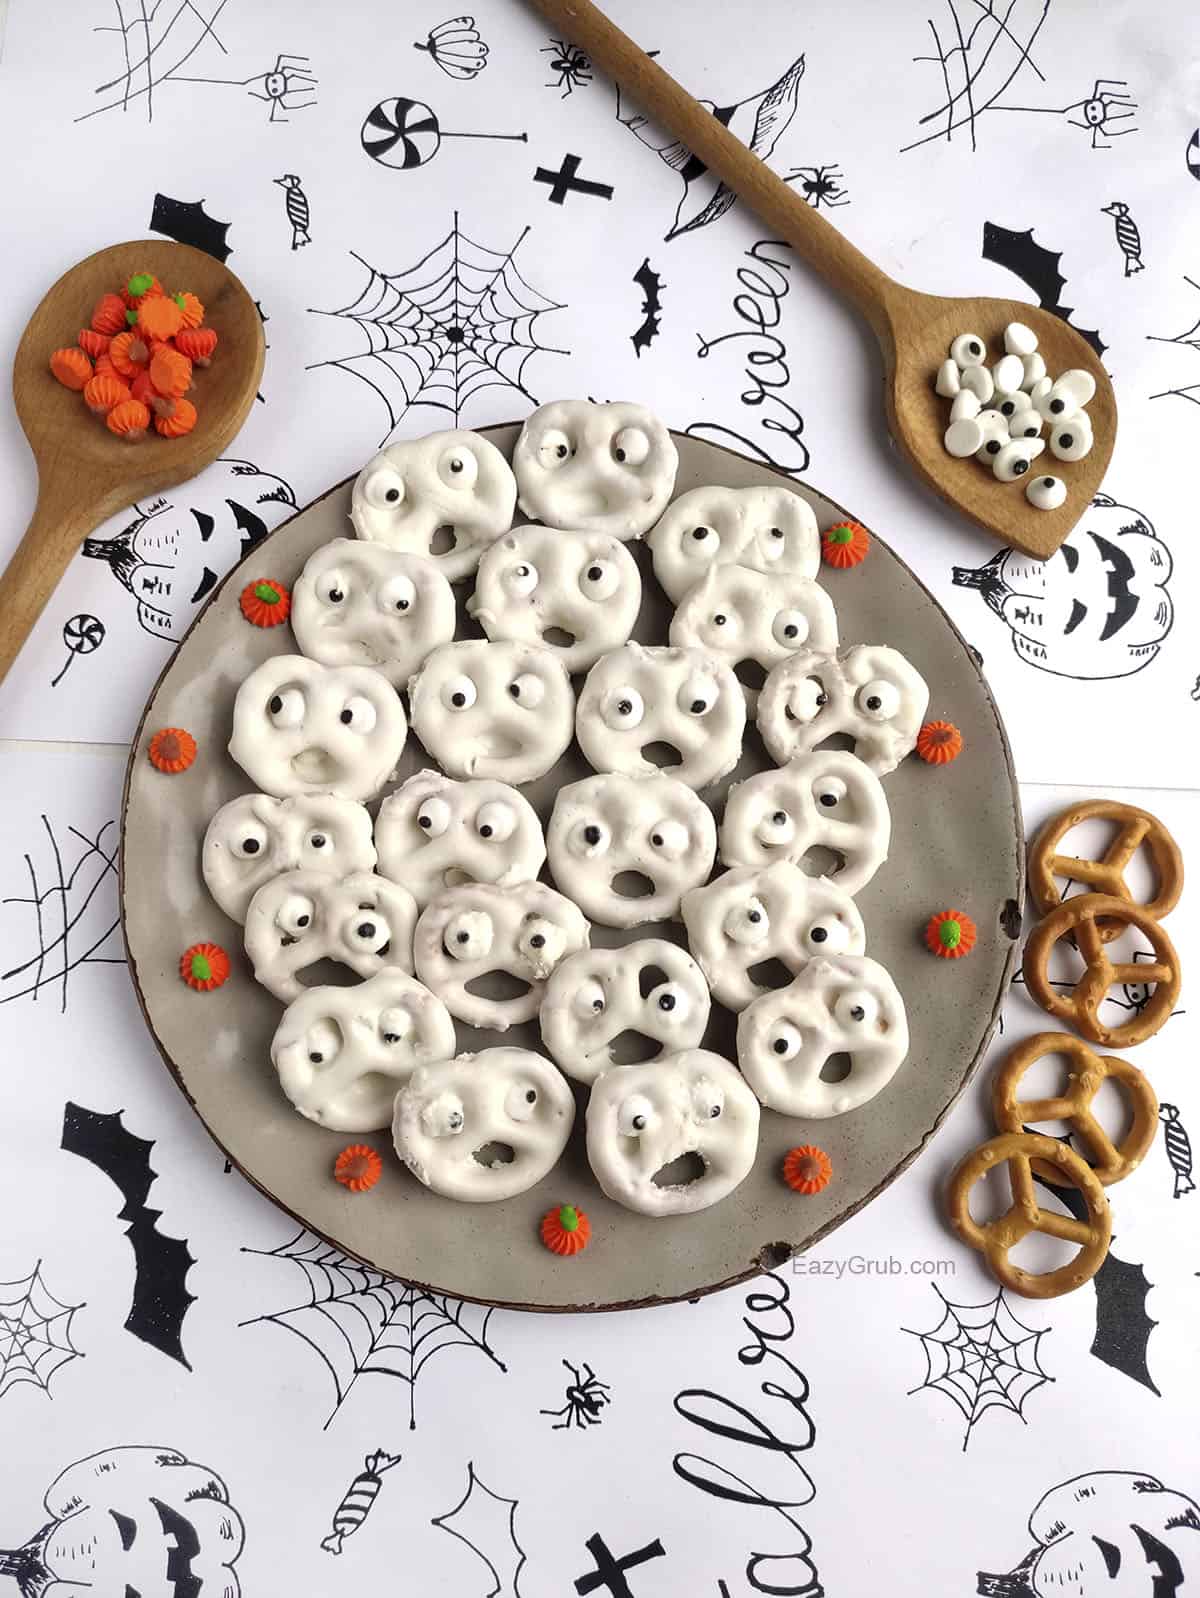 Pretzel ghosts sit on a plate with pretzels on the bottom right, and wooden spoons filled with candy pumpkins and candy eyes above the plate.